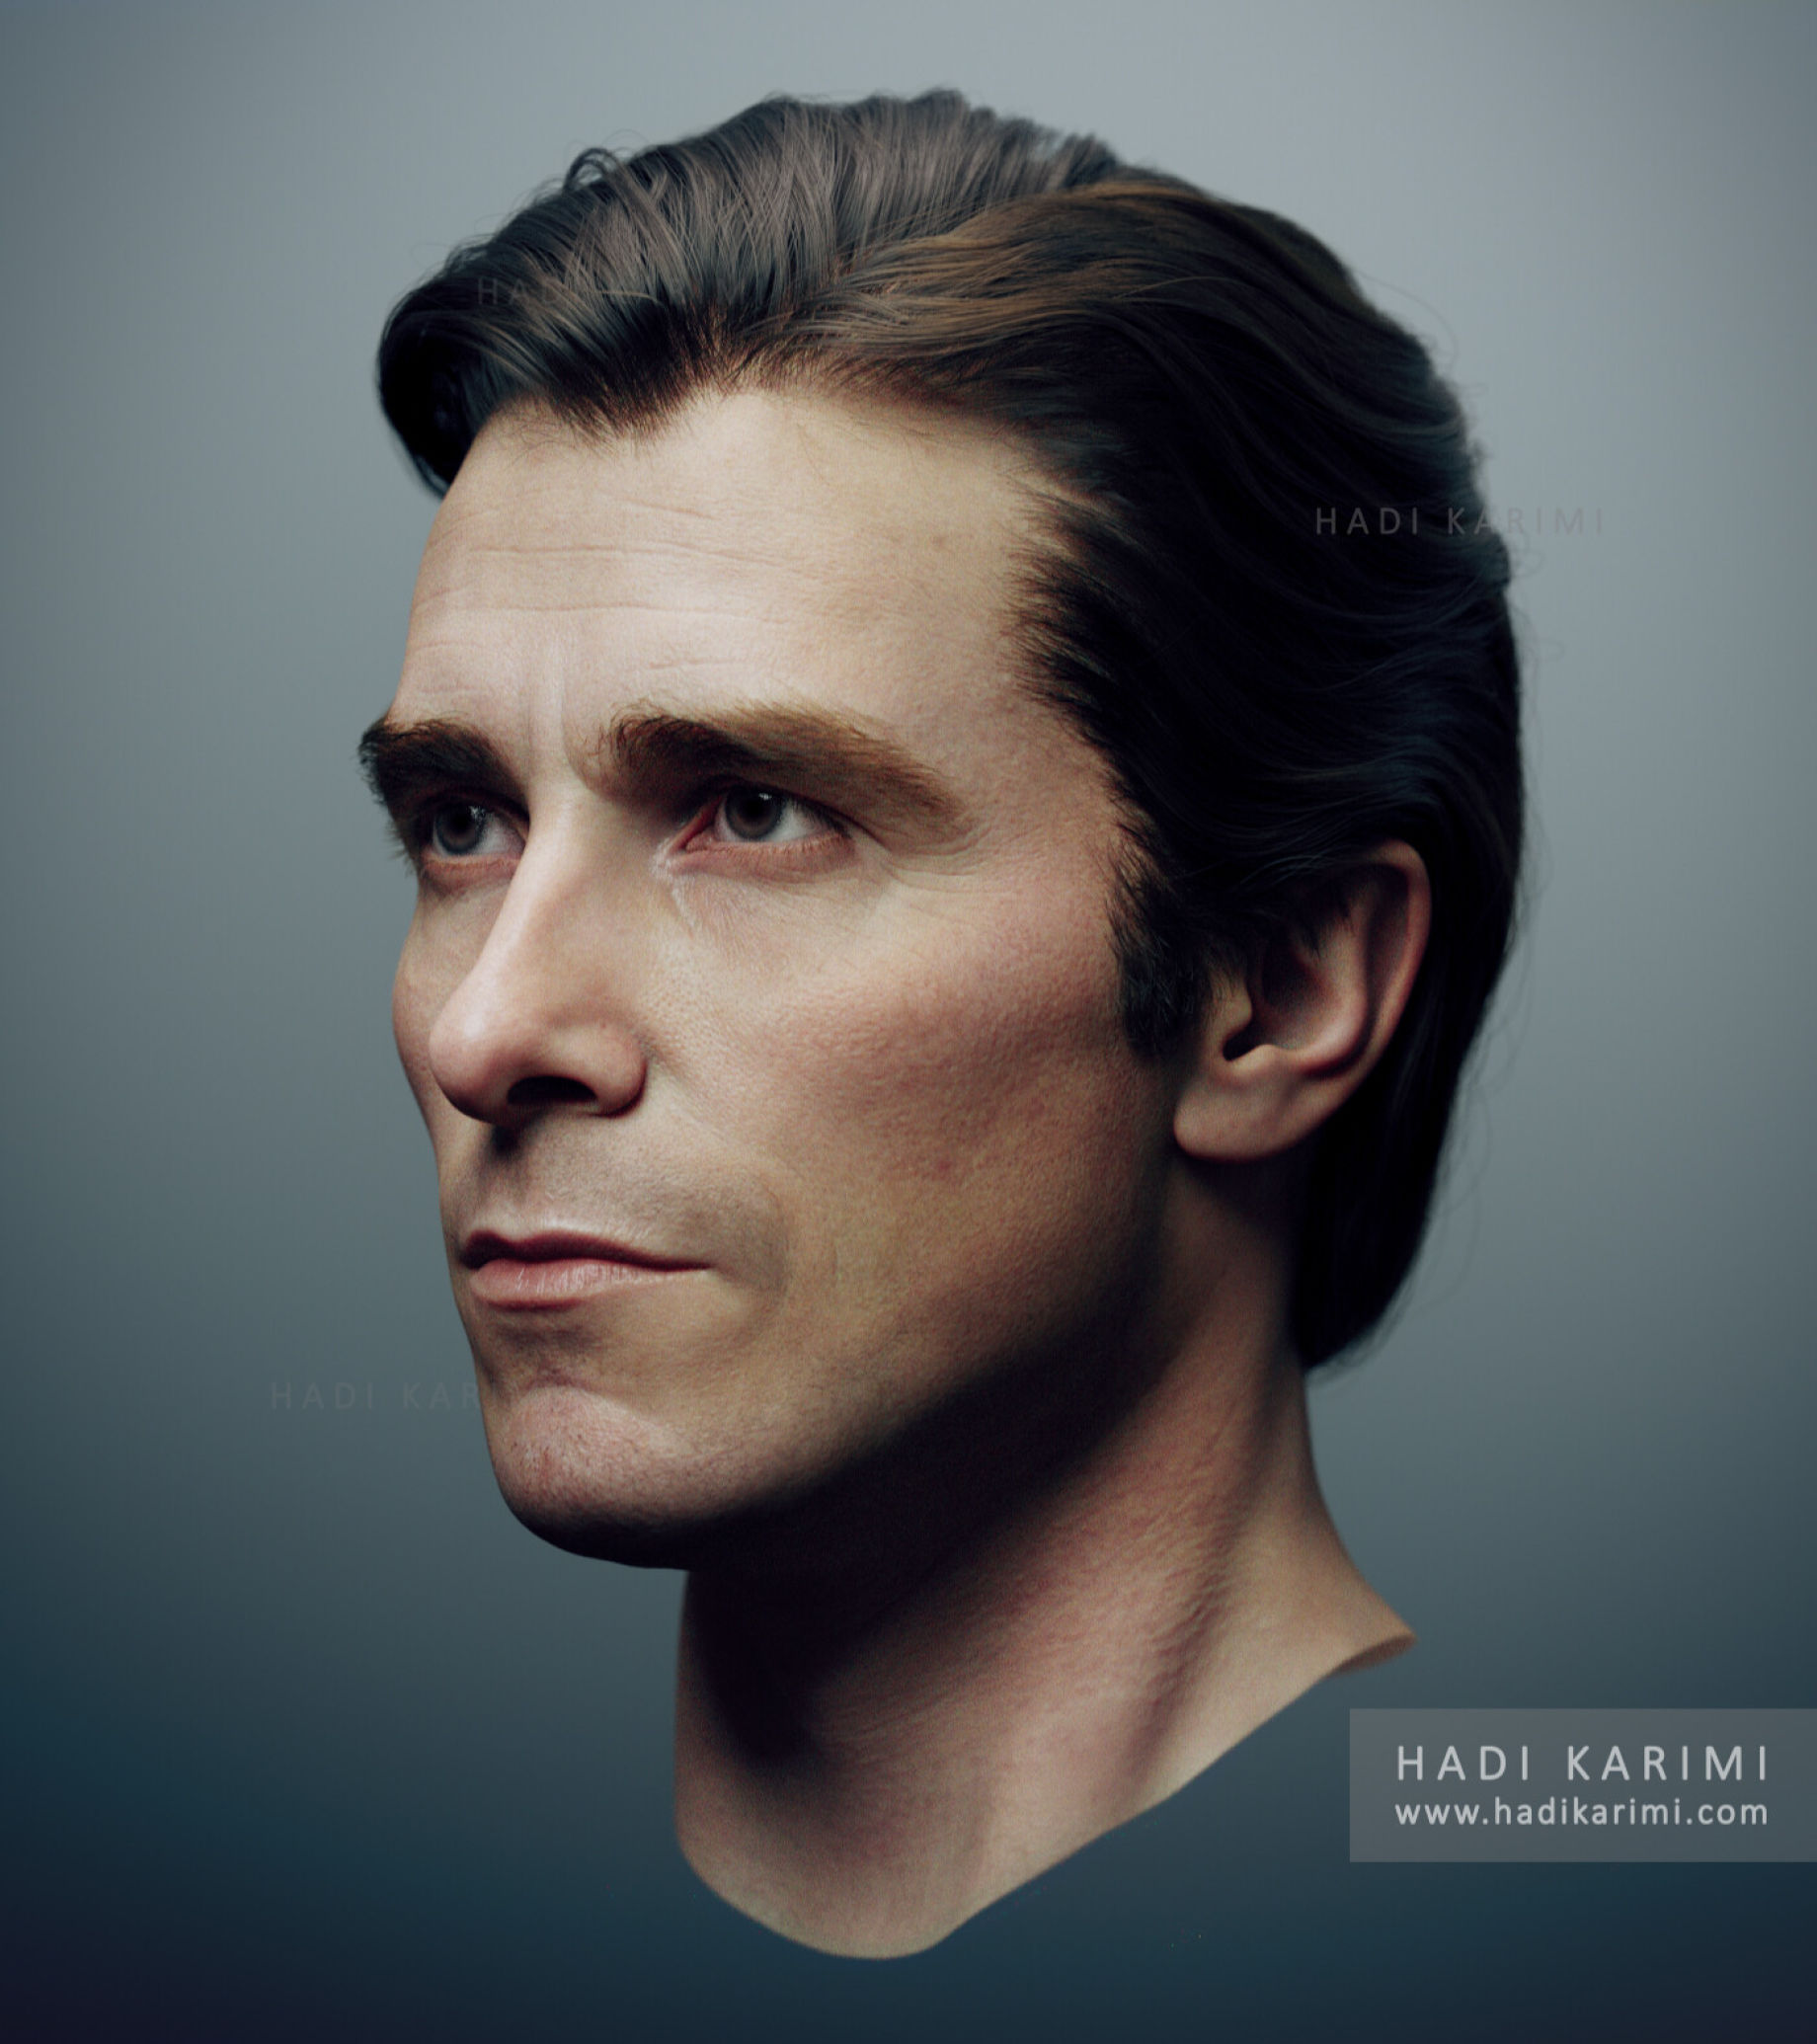 I have straight dark fine hair, what product(s) and grooming process would  I need to get Christian Bales Bruce Wayne look? : r/malehairadvice